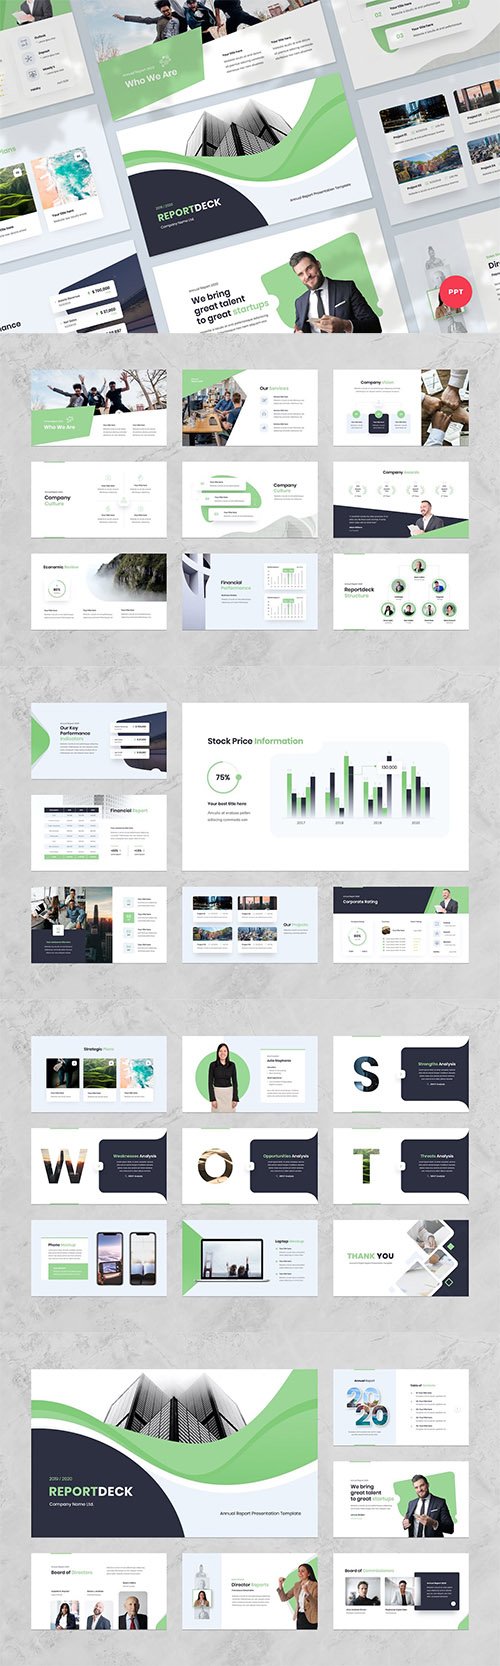 Annual Report & Infographic Powerpoint Template